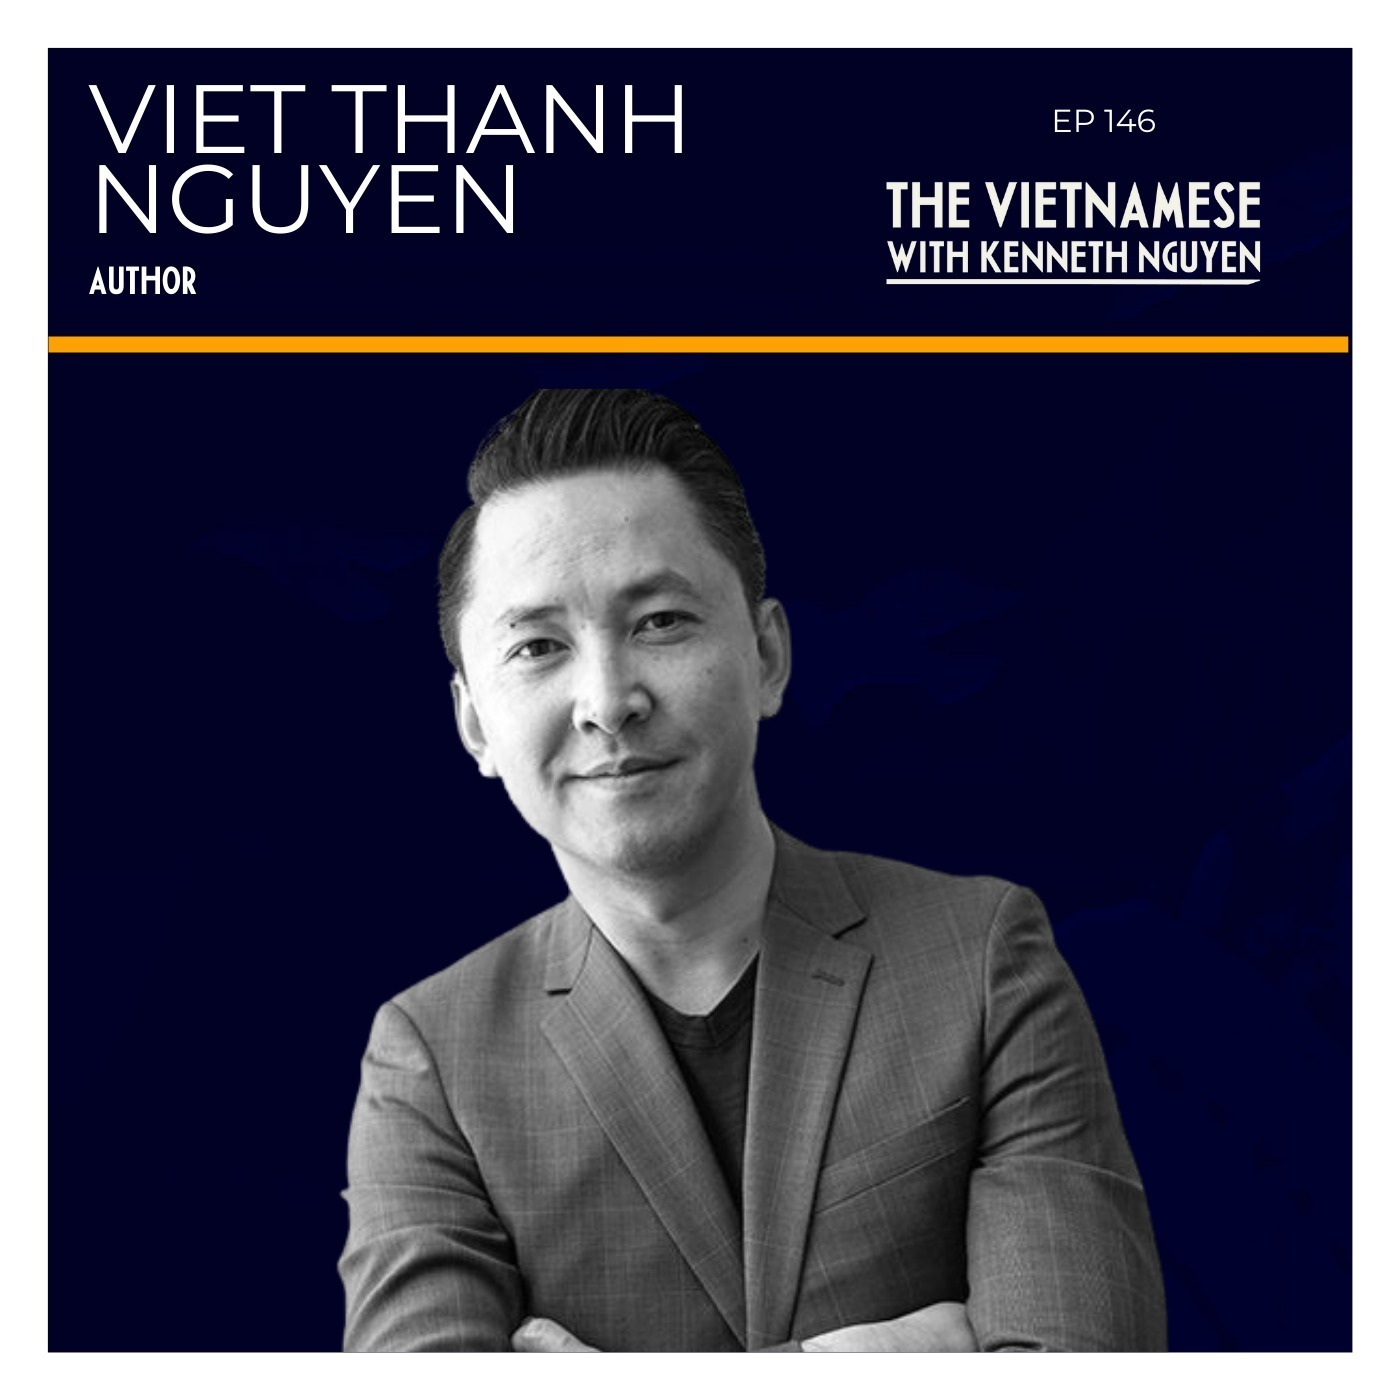 146 - Viet Thanh Nguyen - Pulitzer Prize Author and Scholar